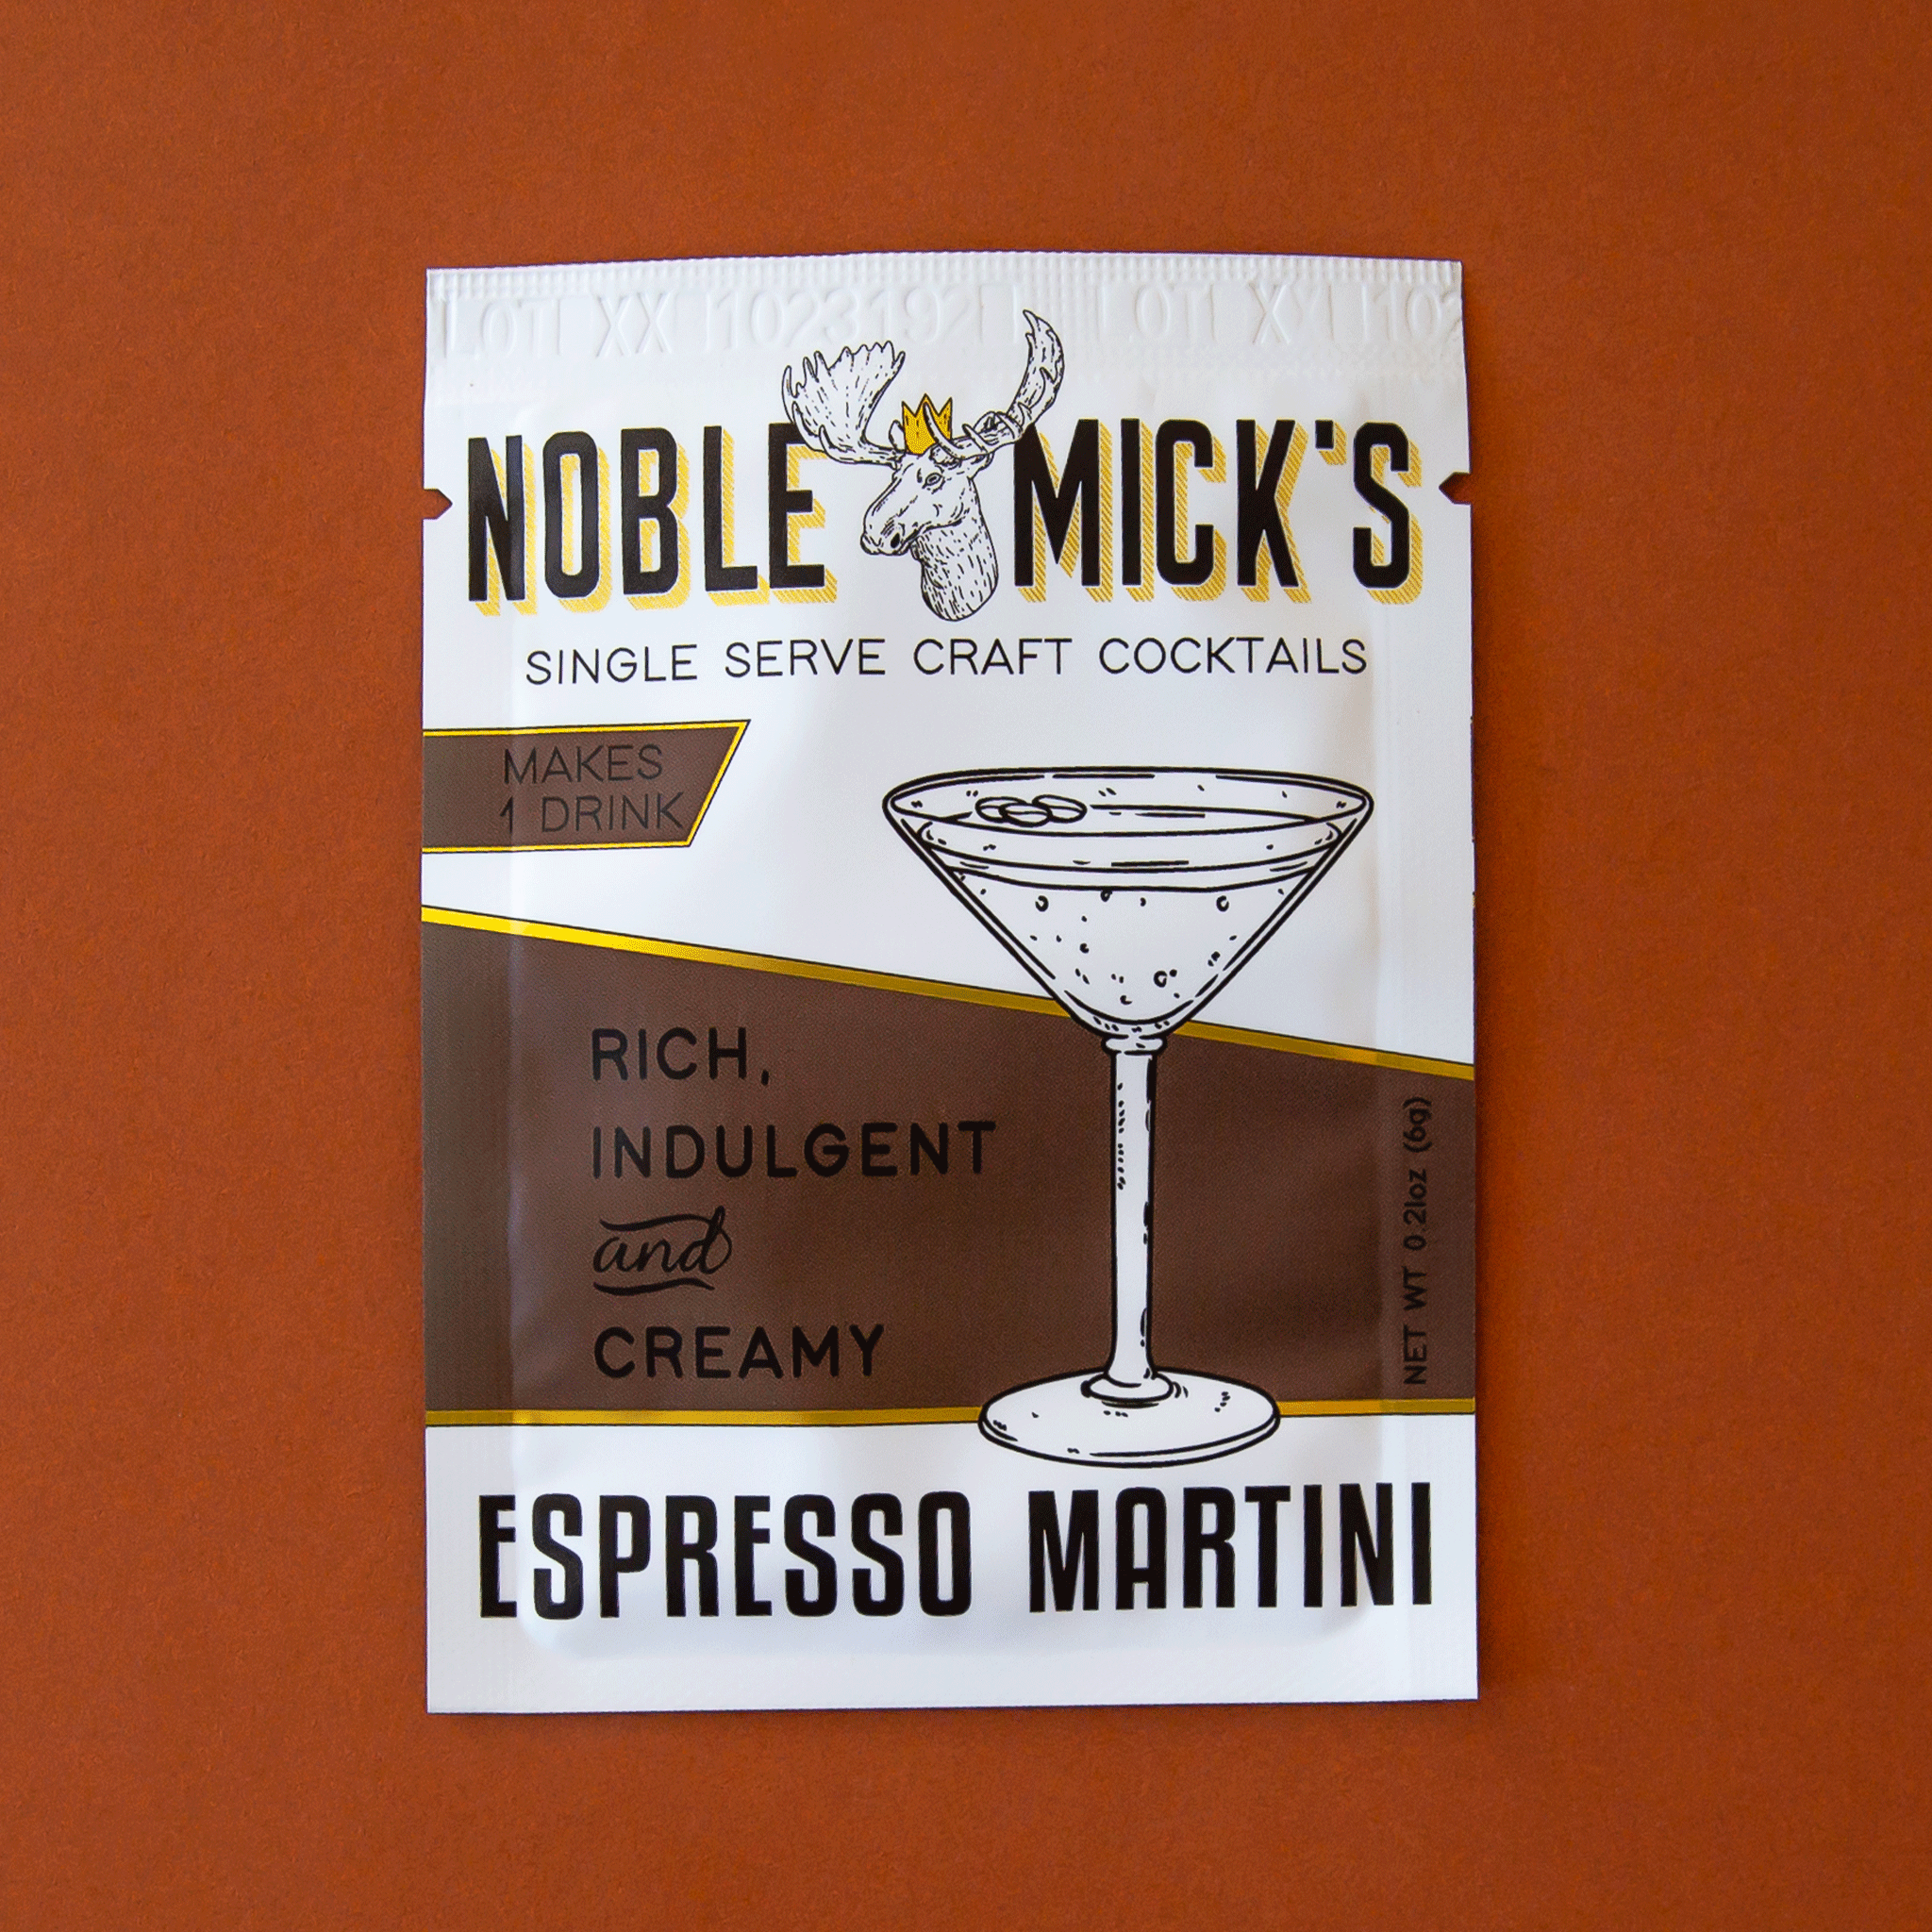 On a burnt orange background is a white and brown cocktail mix packet for espresso martinis with a graphic of a martini glass and a moose at the top that reads, "Noble Mick"s Single Serve Craft Cocktails".